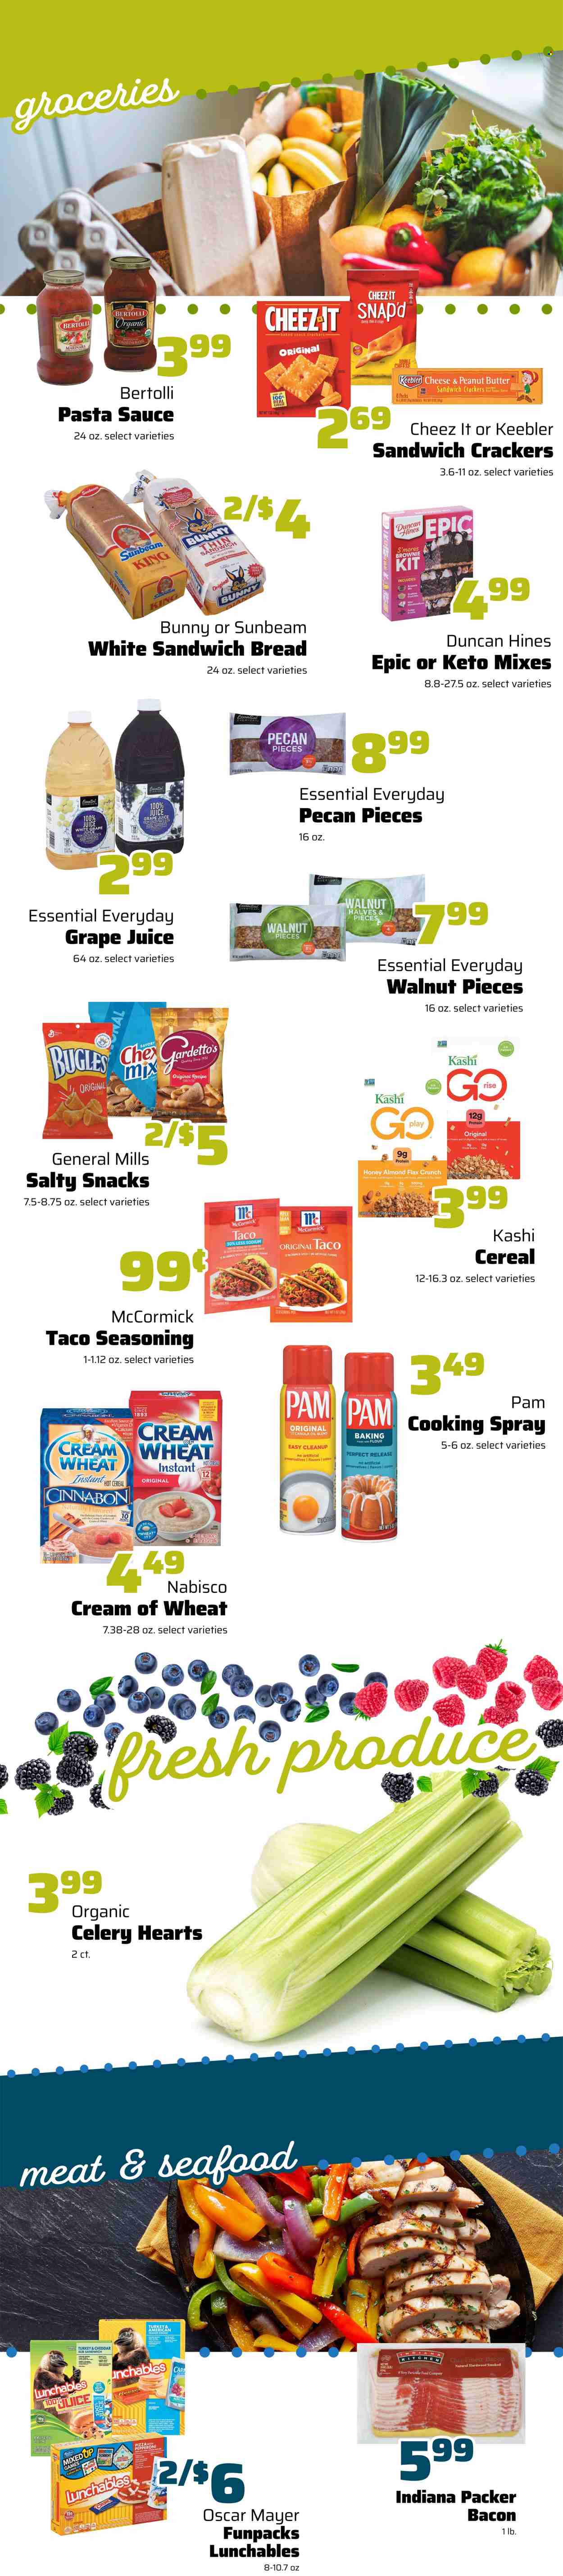 thumbnail - County Market Flyer - 09/28/2022 - 10/04/2022 - Sales products - brownie mix, sleeved celery, seafood, pasta sauce, Lunchables, Bertolli, bacon, Oscar Mayer, pepperoni, fudge, marshmallows, chocolate, snack, crackers, Keebler, plant protein, cereals, Cream of Wheat, spice, canola oil, cooking spray, oil, peanut butter, walnuts, juice. Page 2.